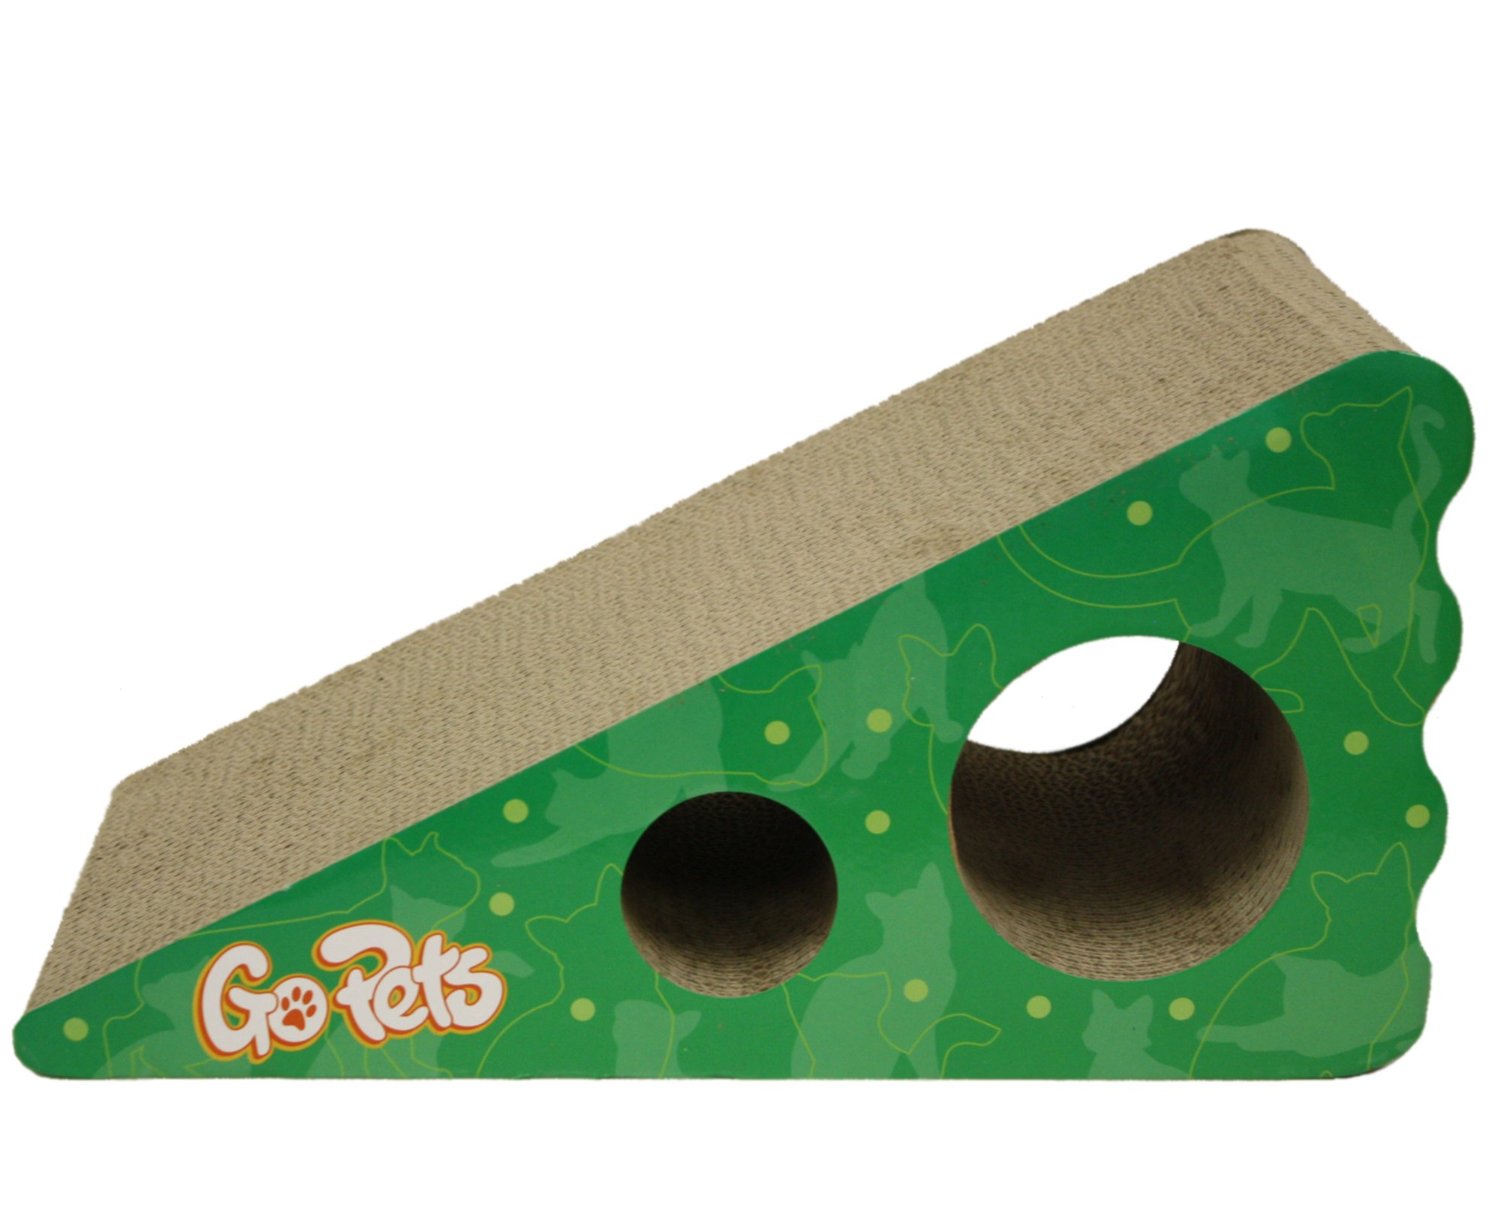 Premium Cat Scratcher by GoPets Only $16.91 on Amazon!